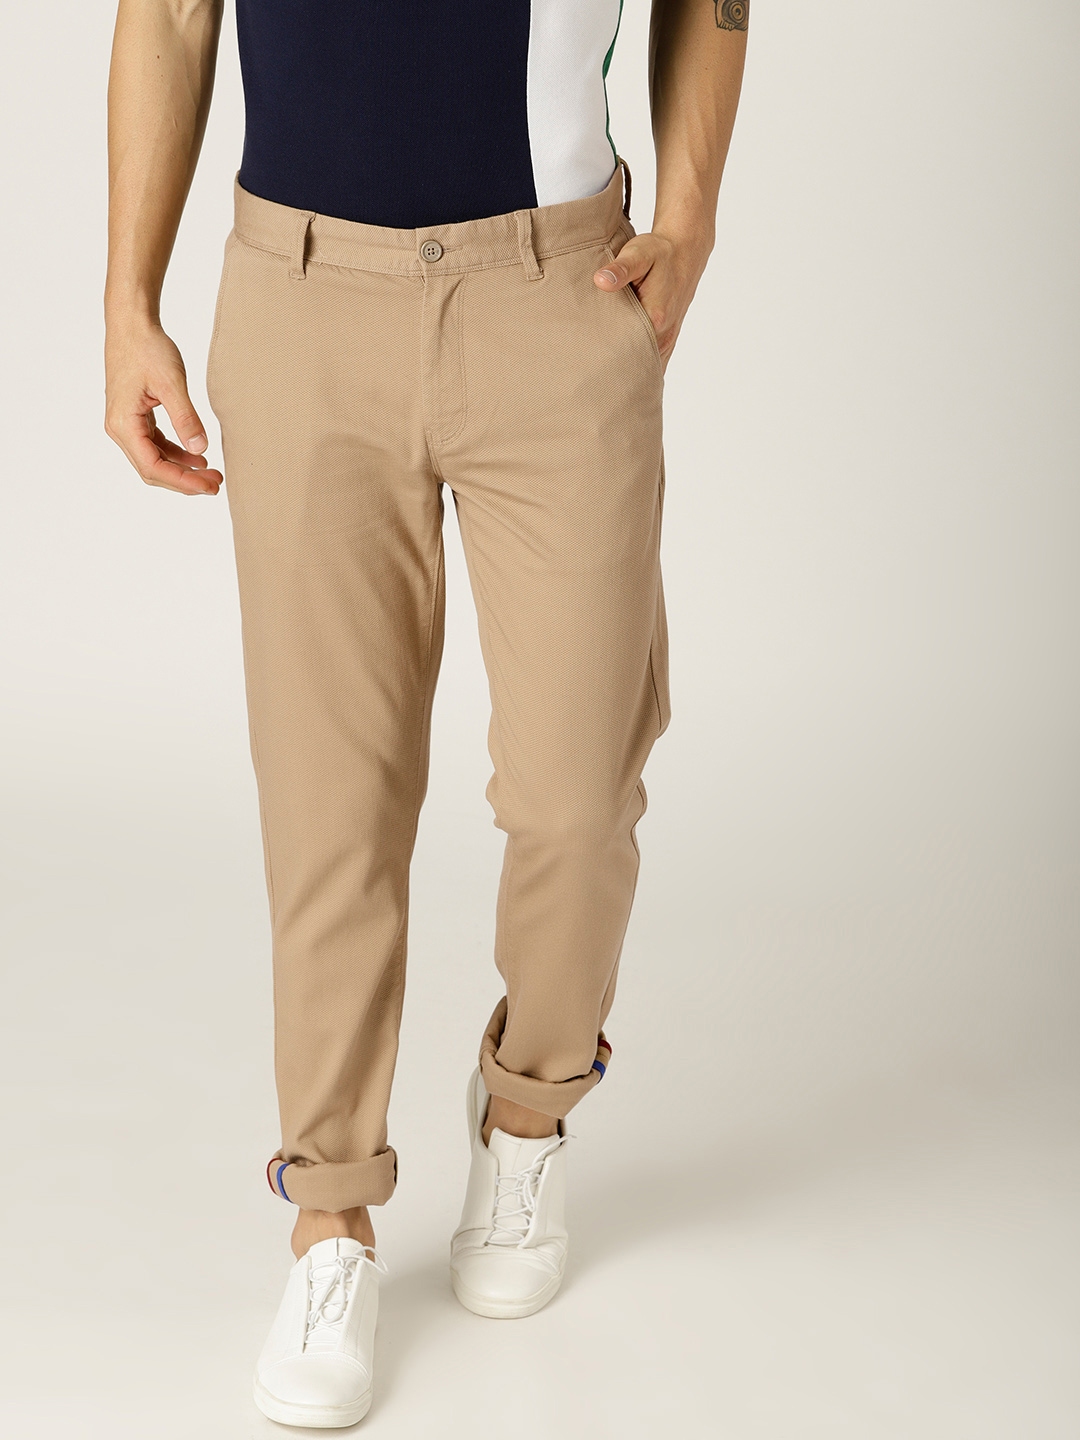 Buy United Colors Of Benetton Men Black Solid Slim Fit Casual Trousers   Trousers for Men 1518585  Myntra